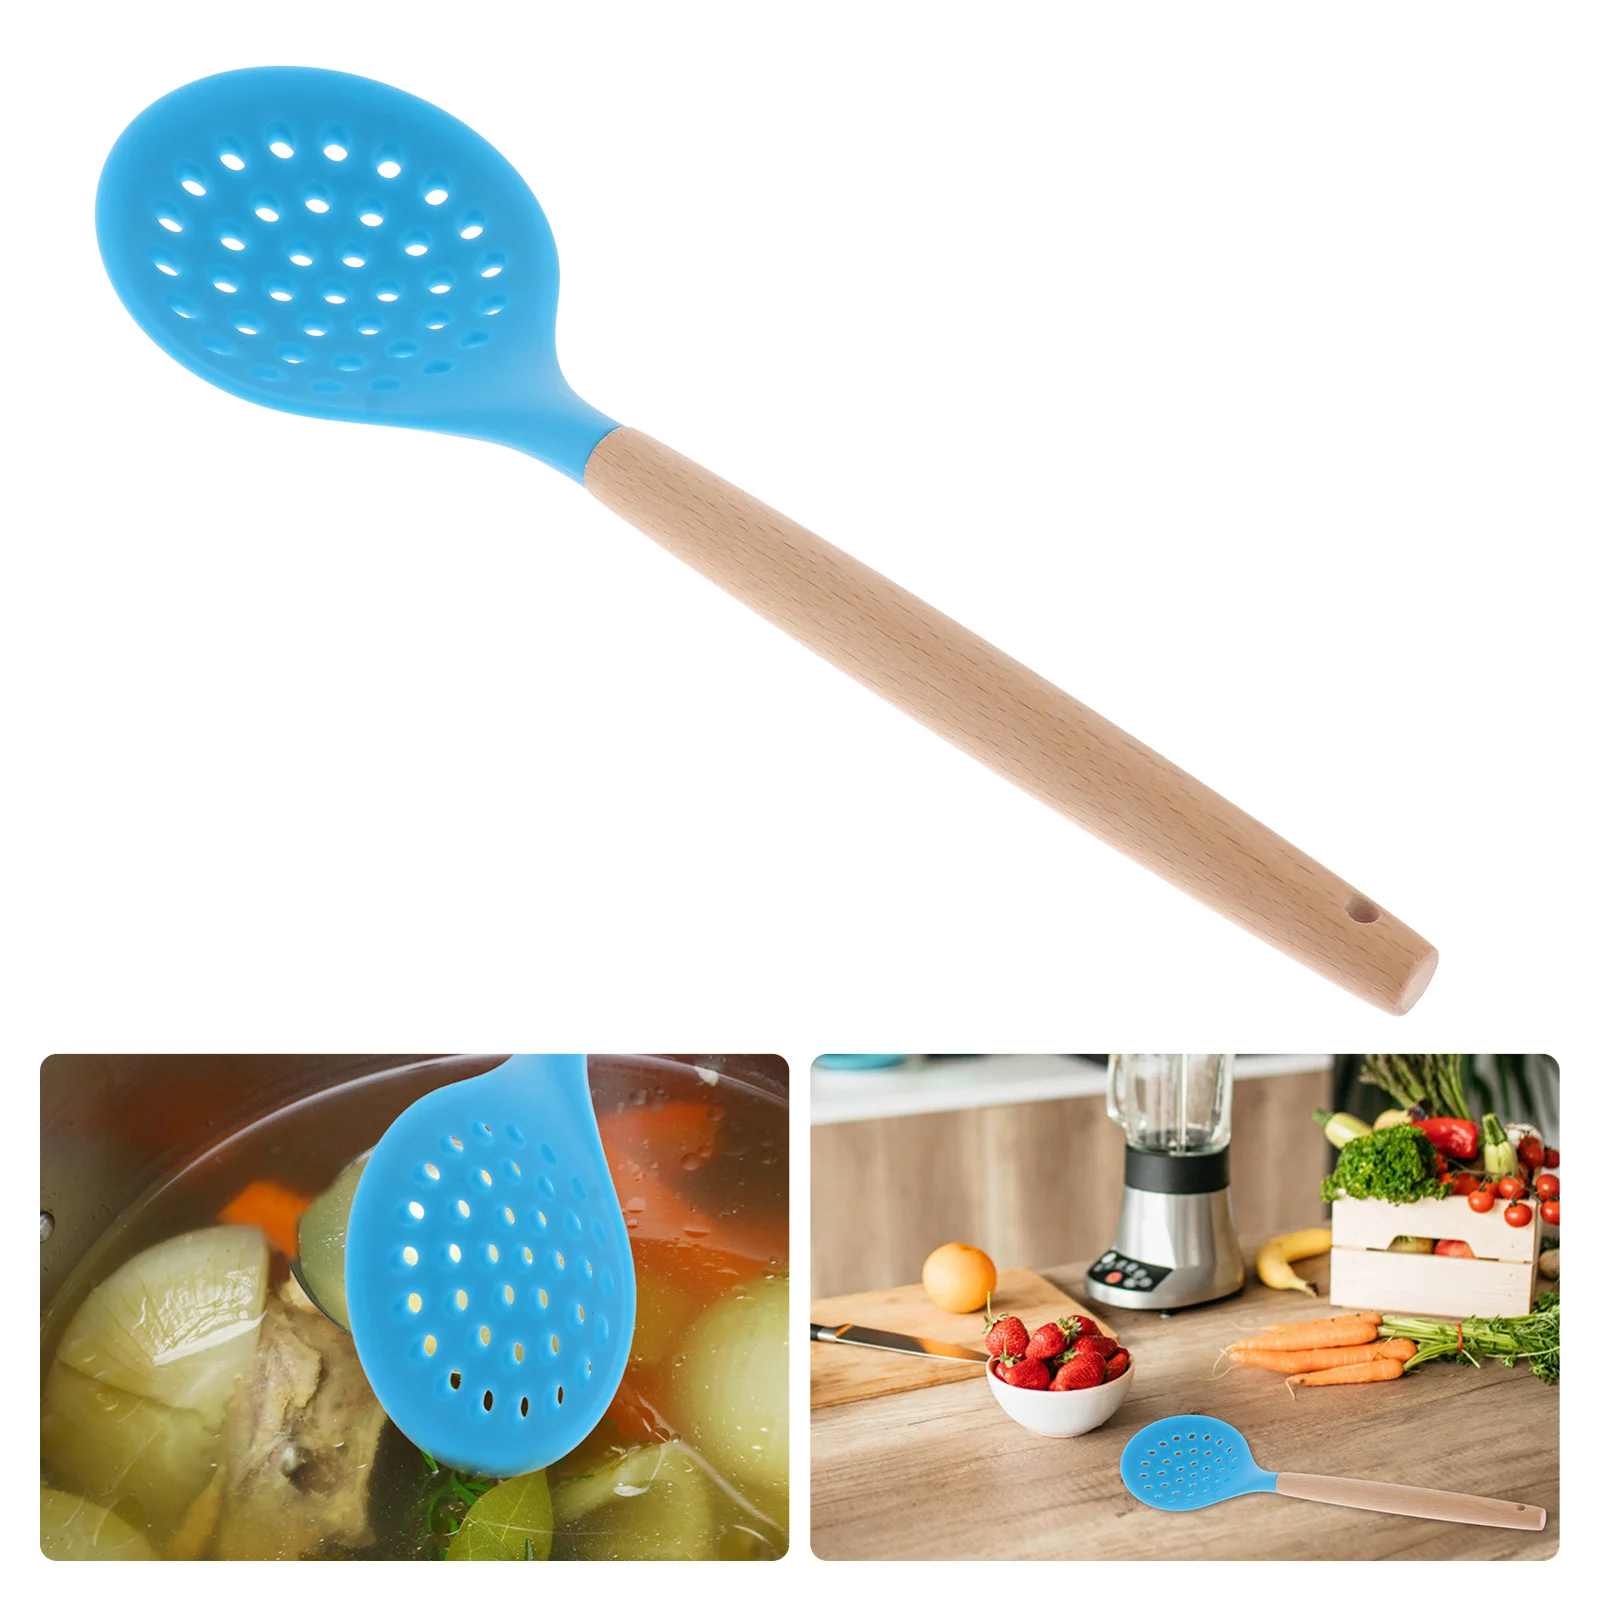 

Spoon Strainer Colander Skimmer Scoop Slotted Kitchen Soup Pot Hot Silicone Cooking Fat Baking Serving Ladle Spoons Skimmers